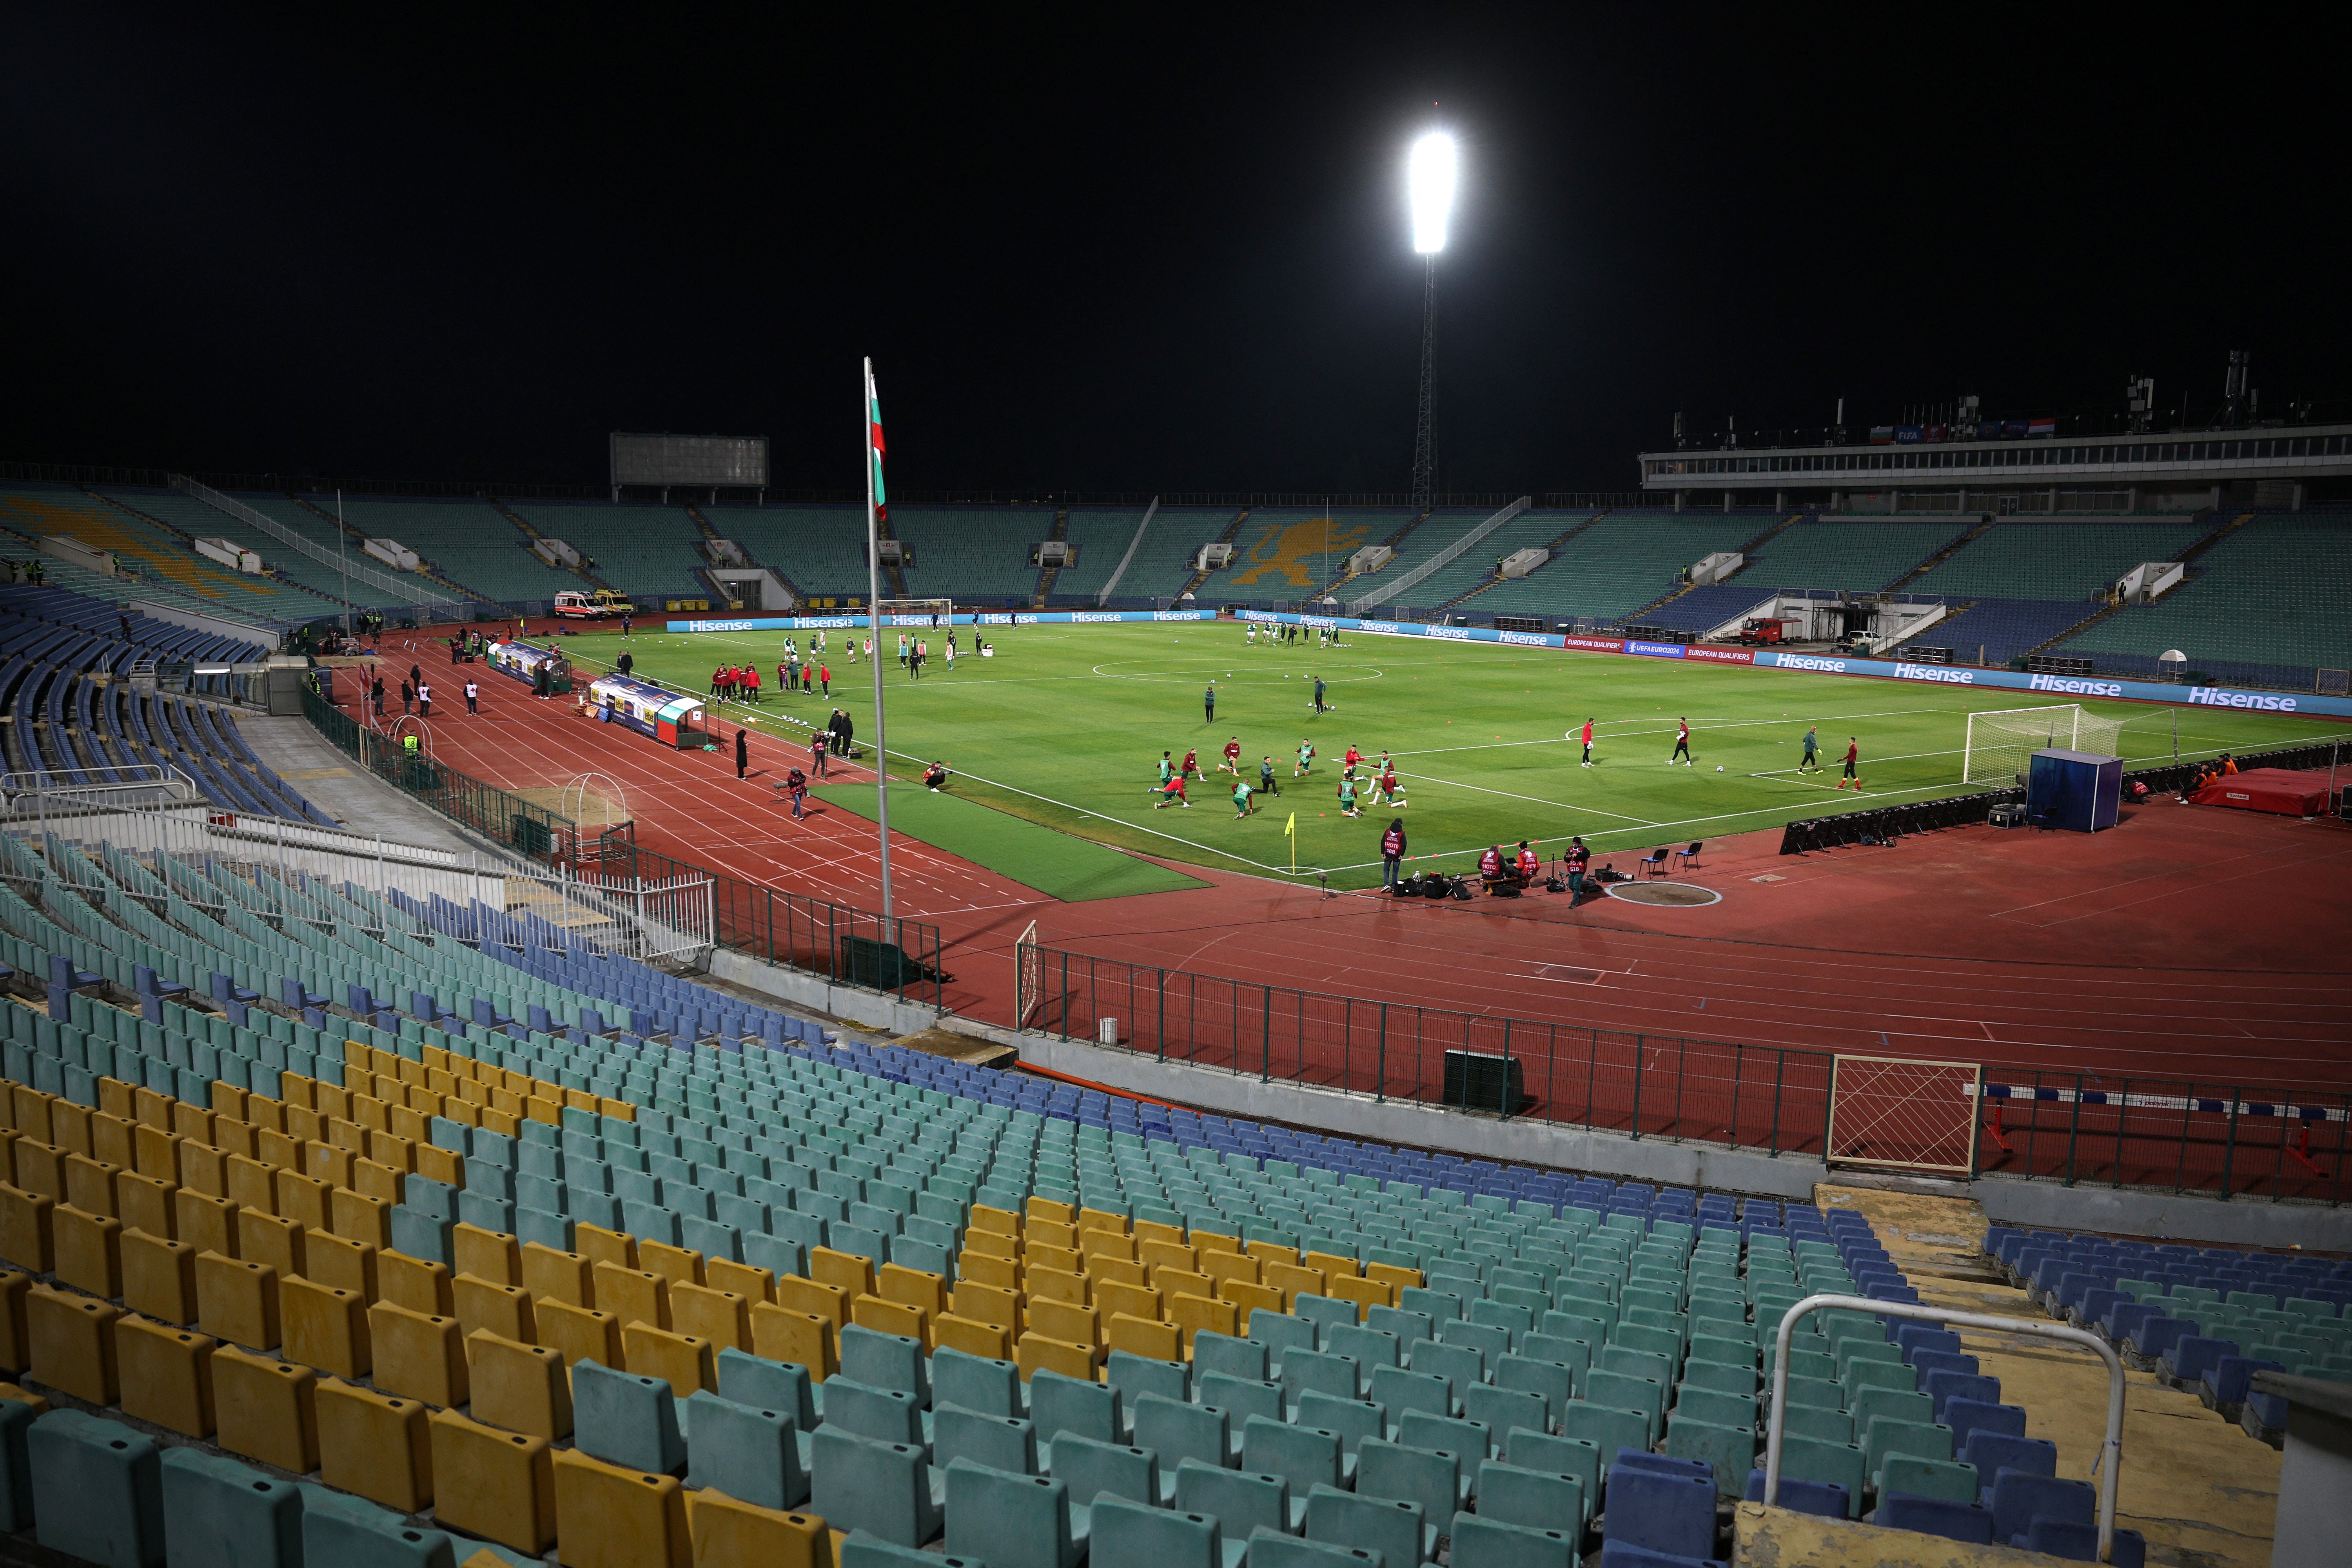 Uefa agreed for Bulgaria’s fixture against Hungary to be played behind closed doors